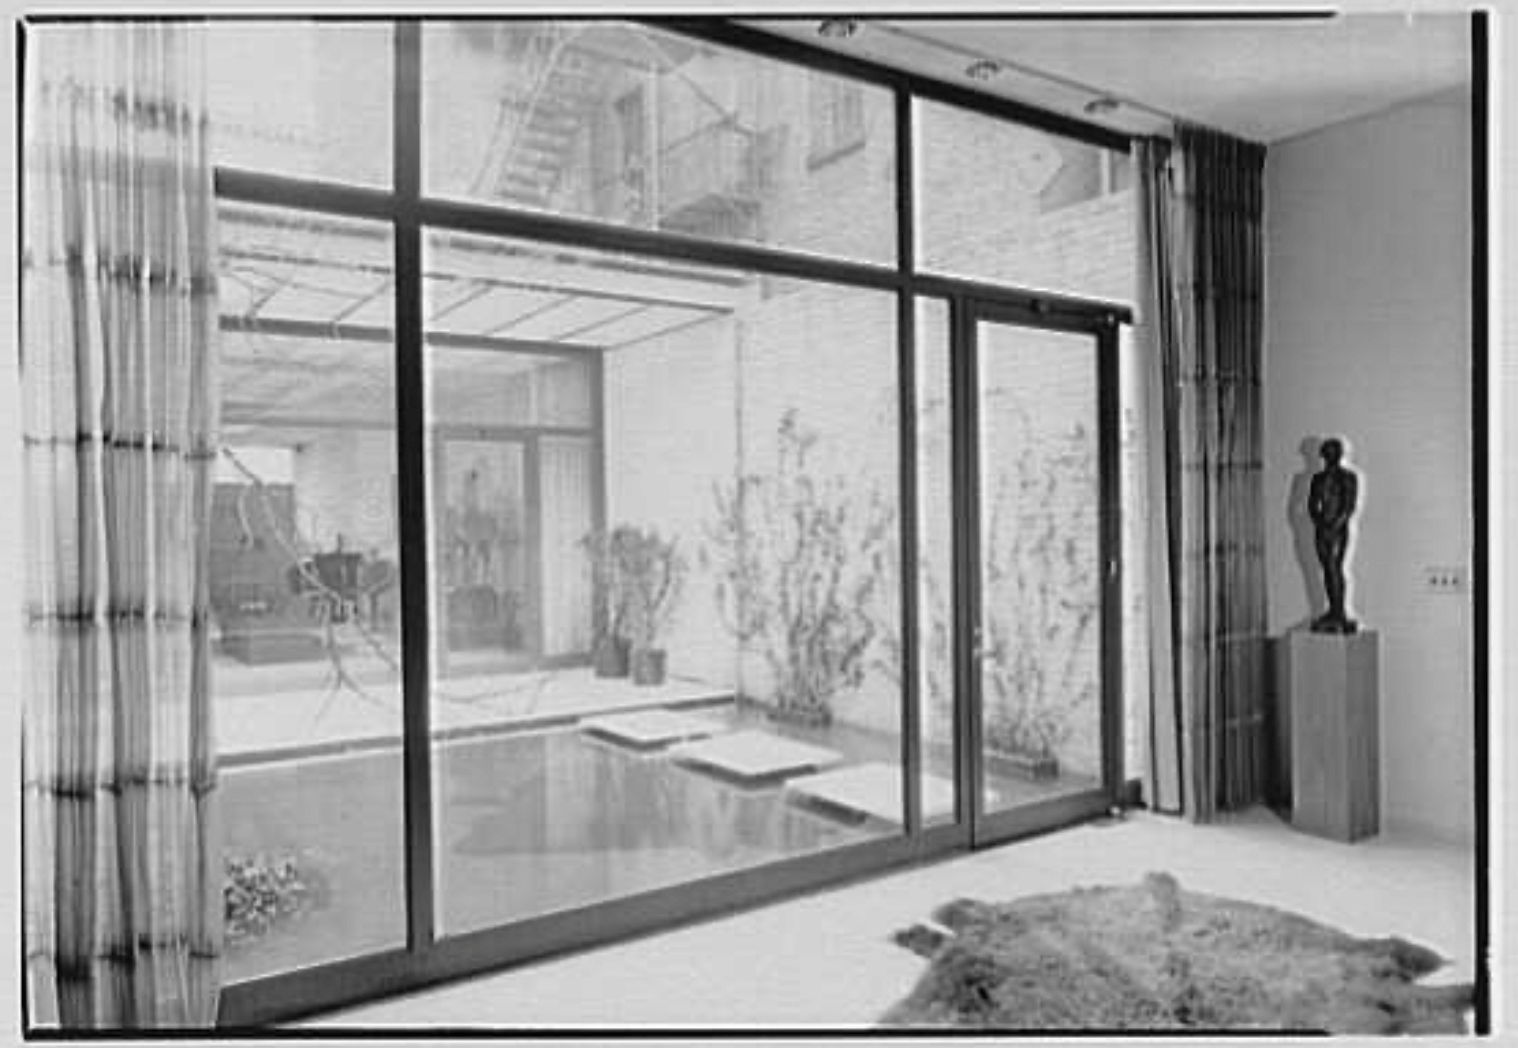 The open-air pond connecting the bedroom to the living room in the 1950s